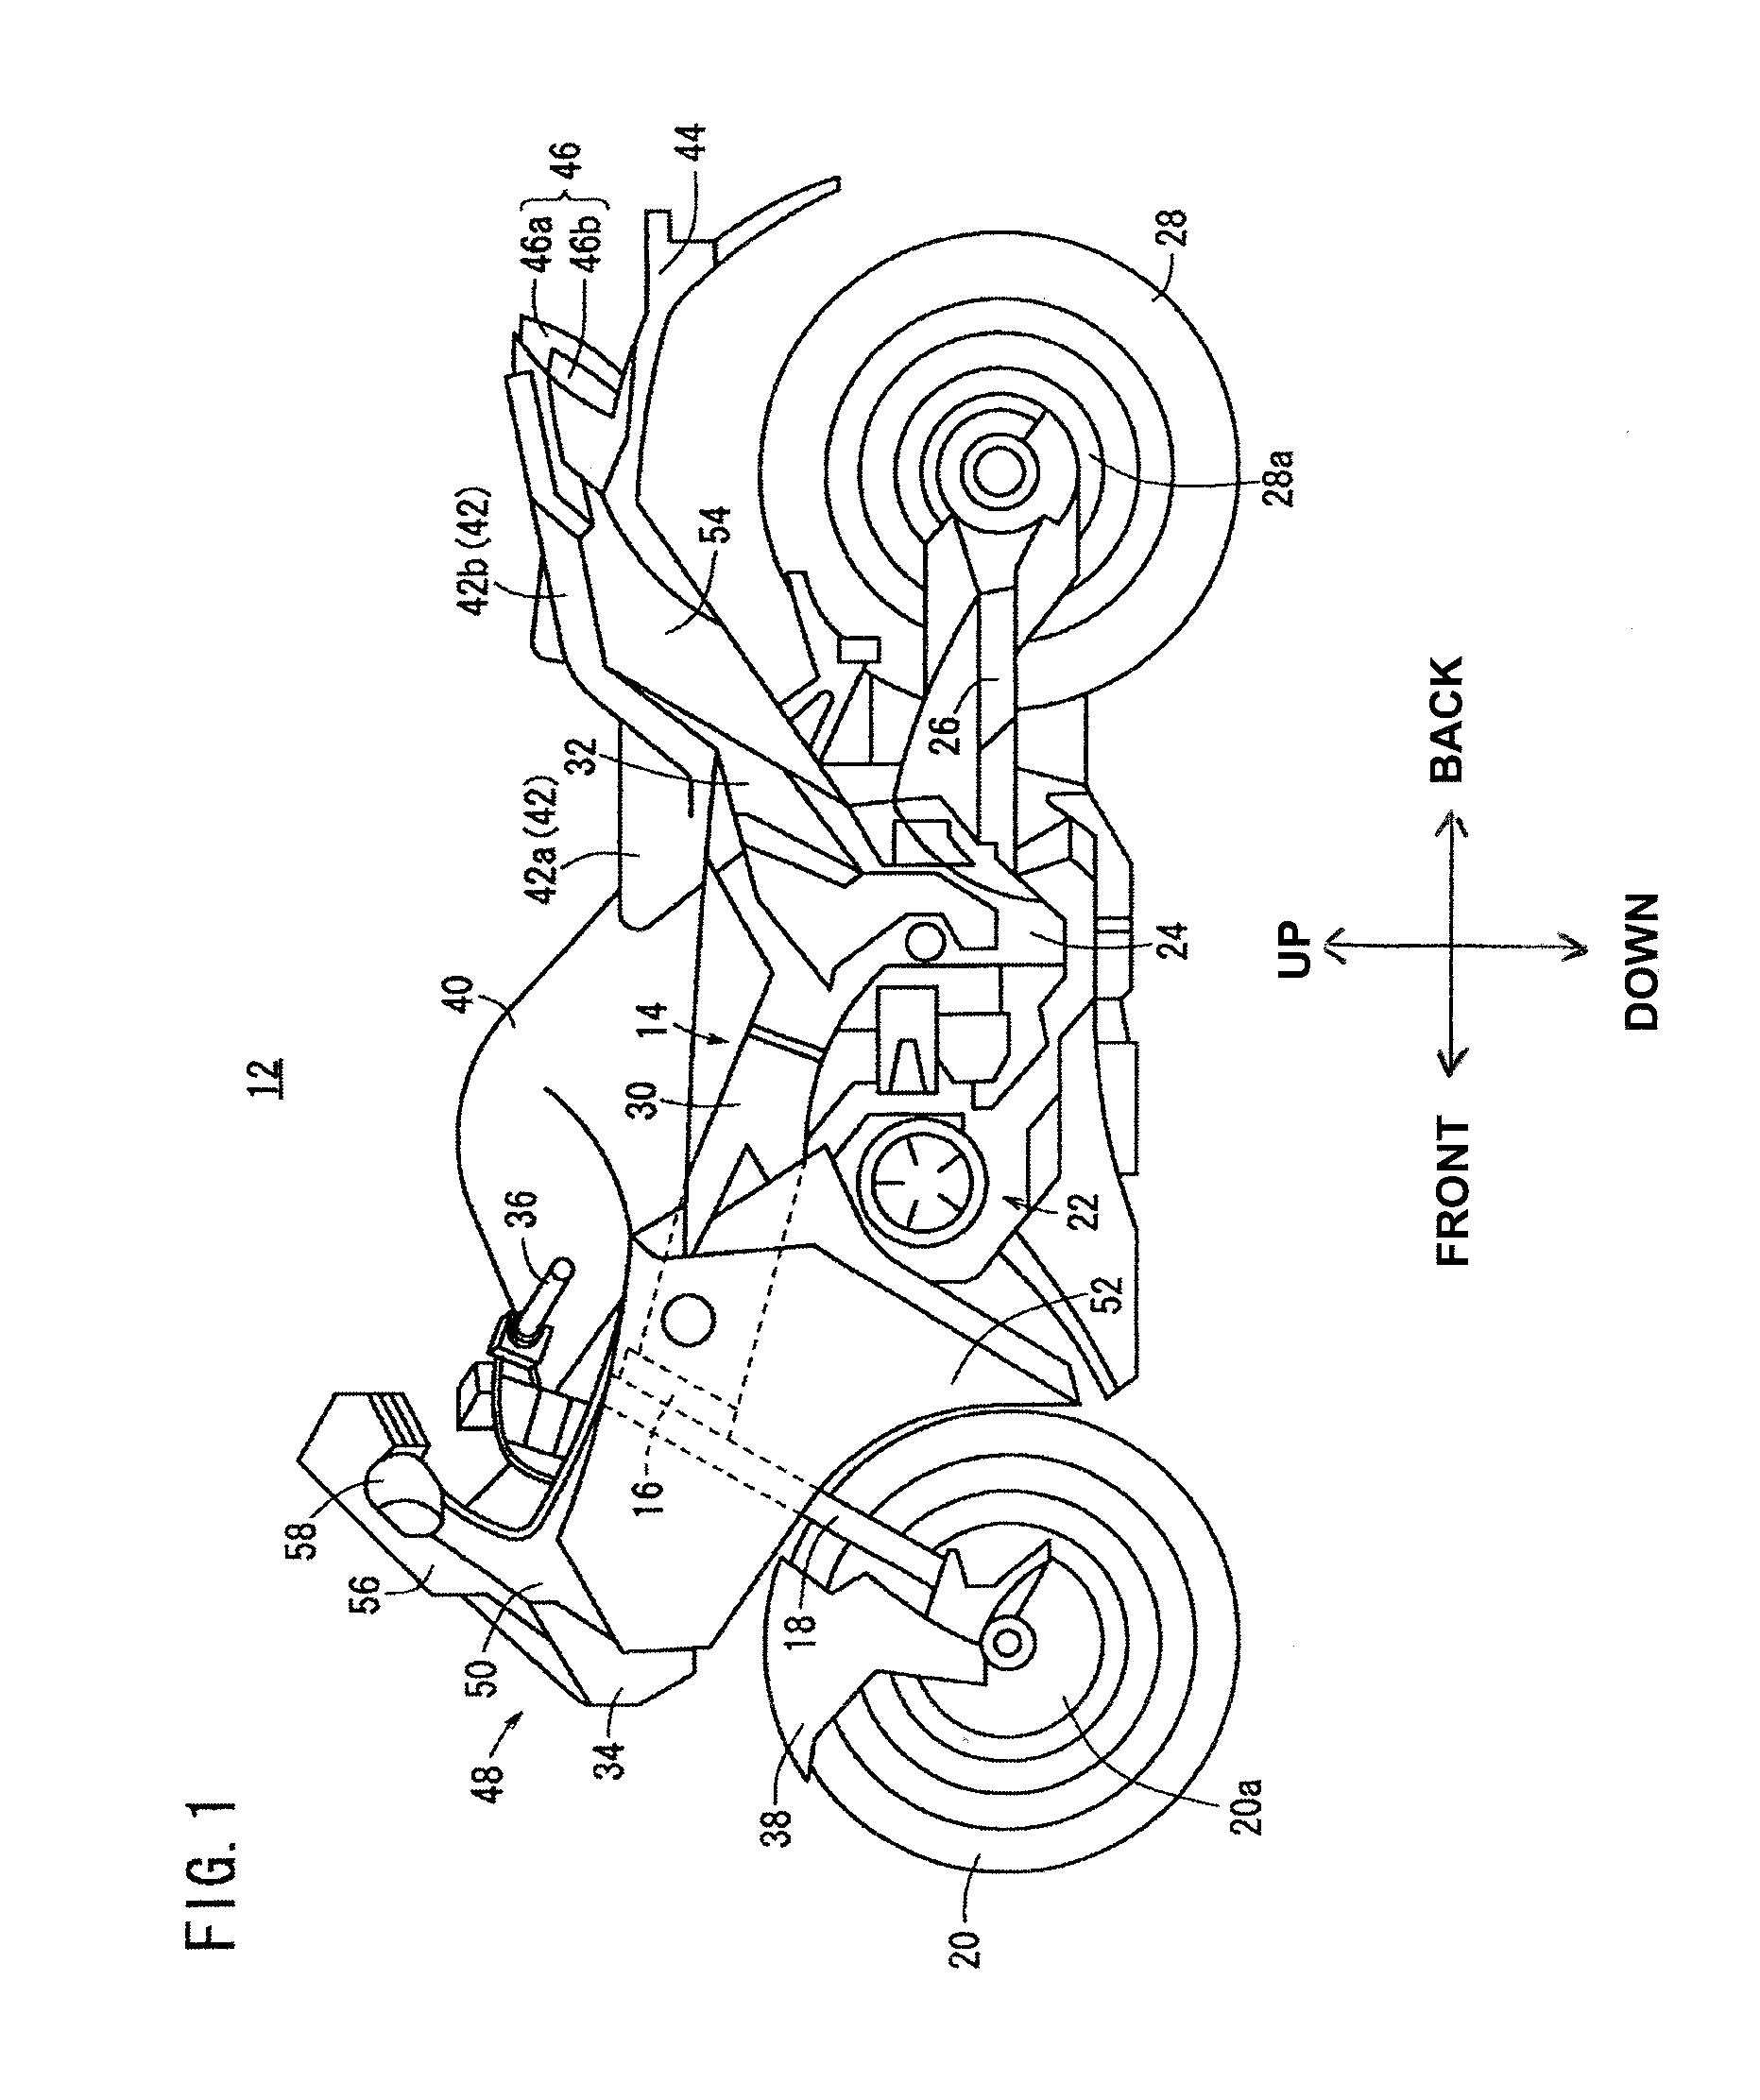 Shift controlling apparatus for vehicle